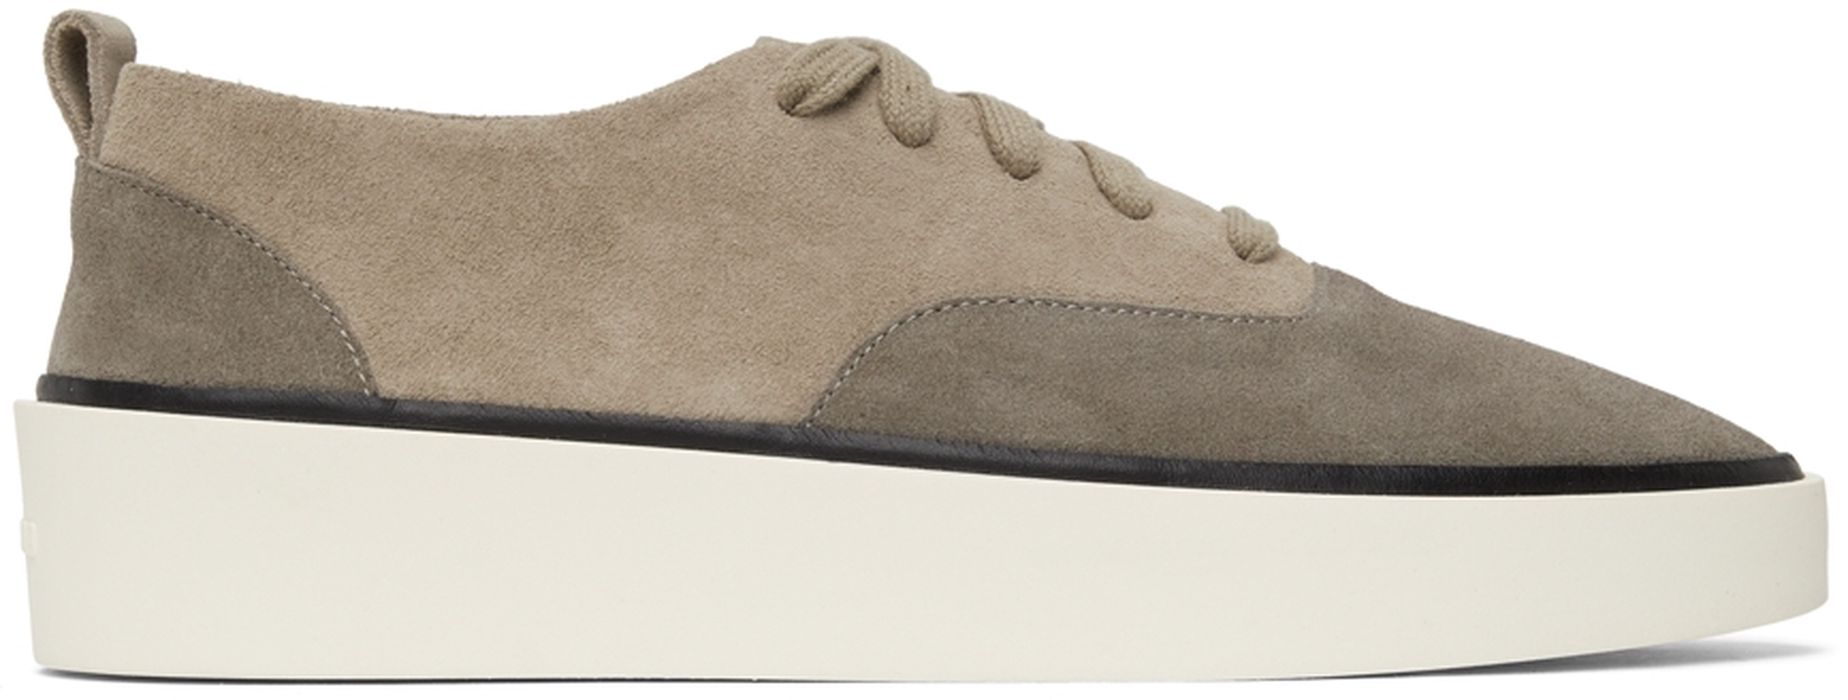 Fear of God Beige & Taupe Suede 101 Sneakers